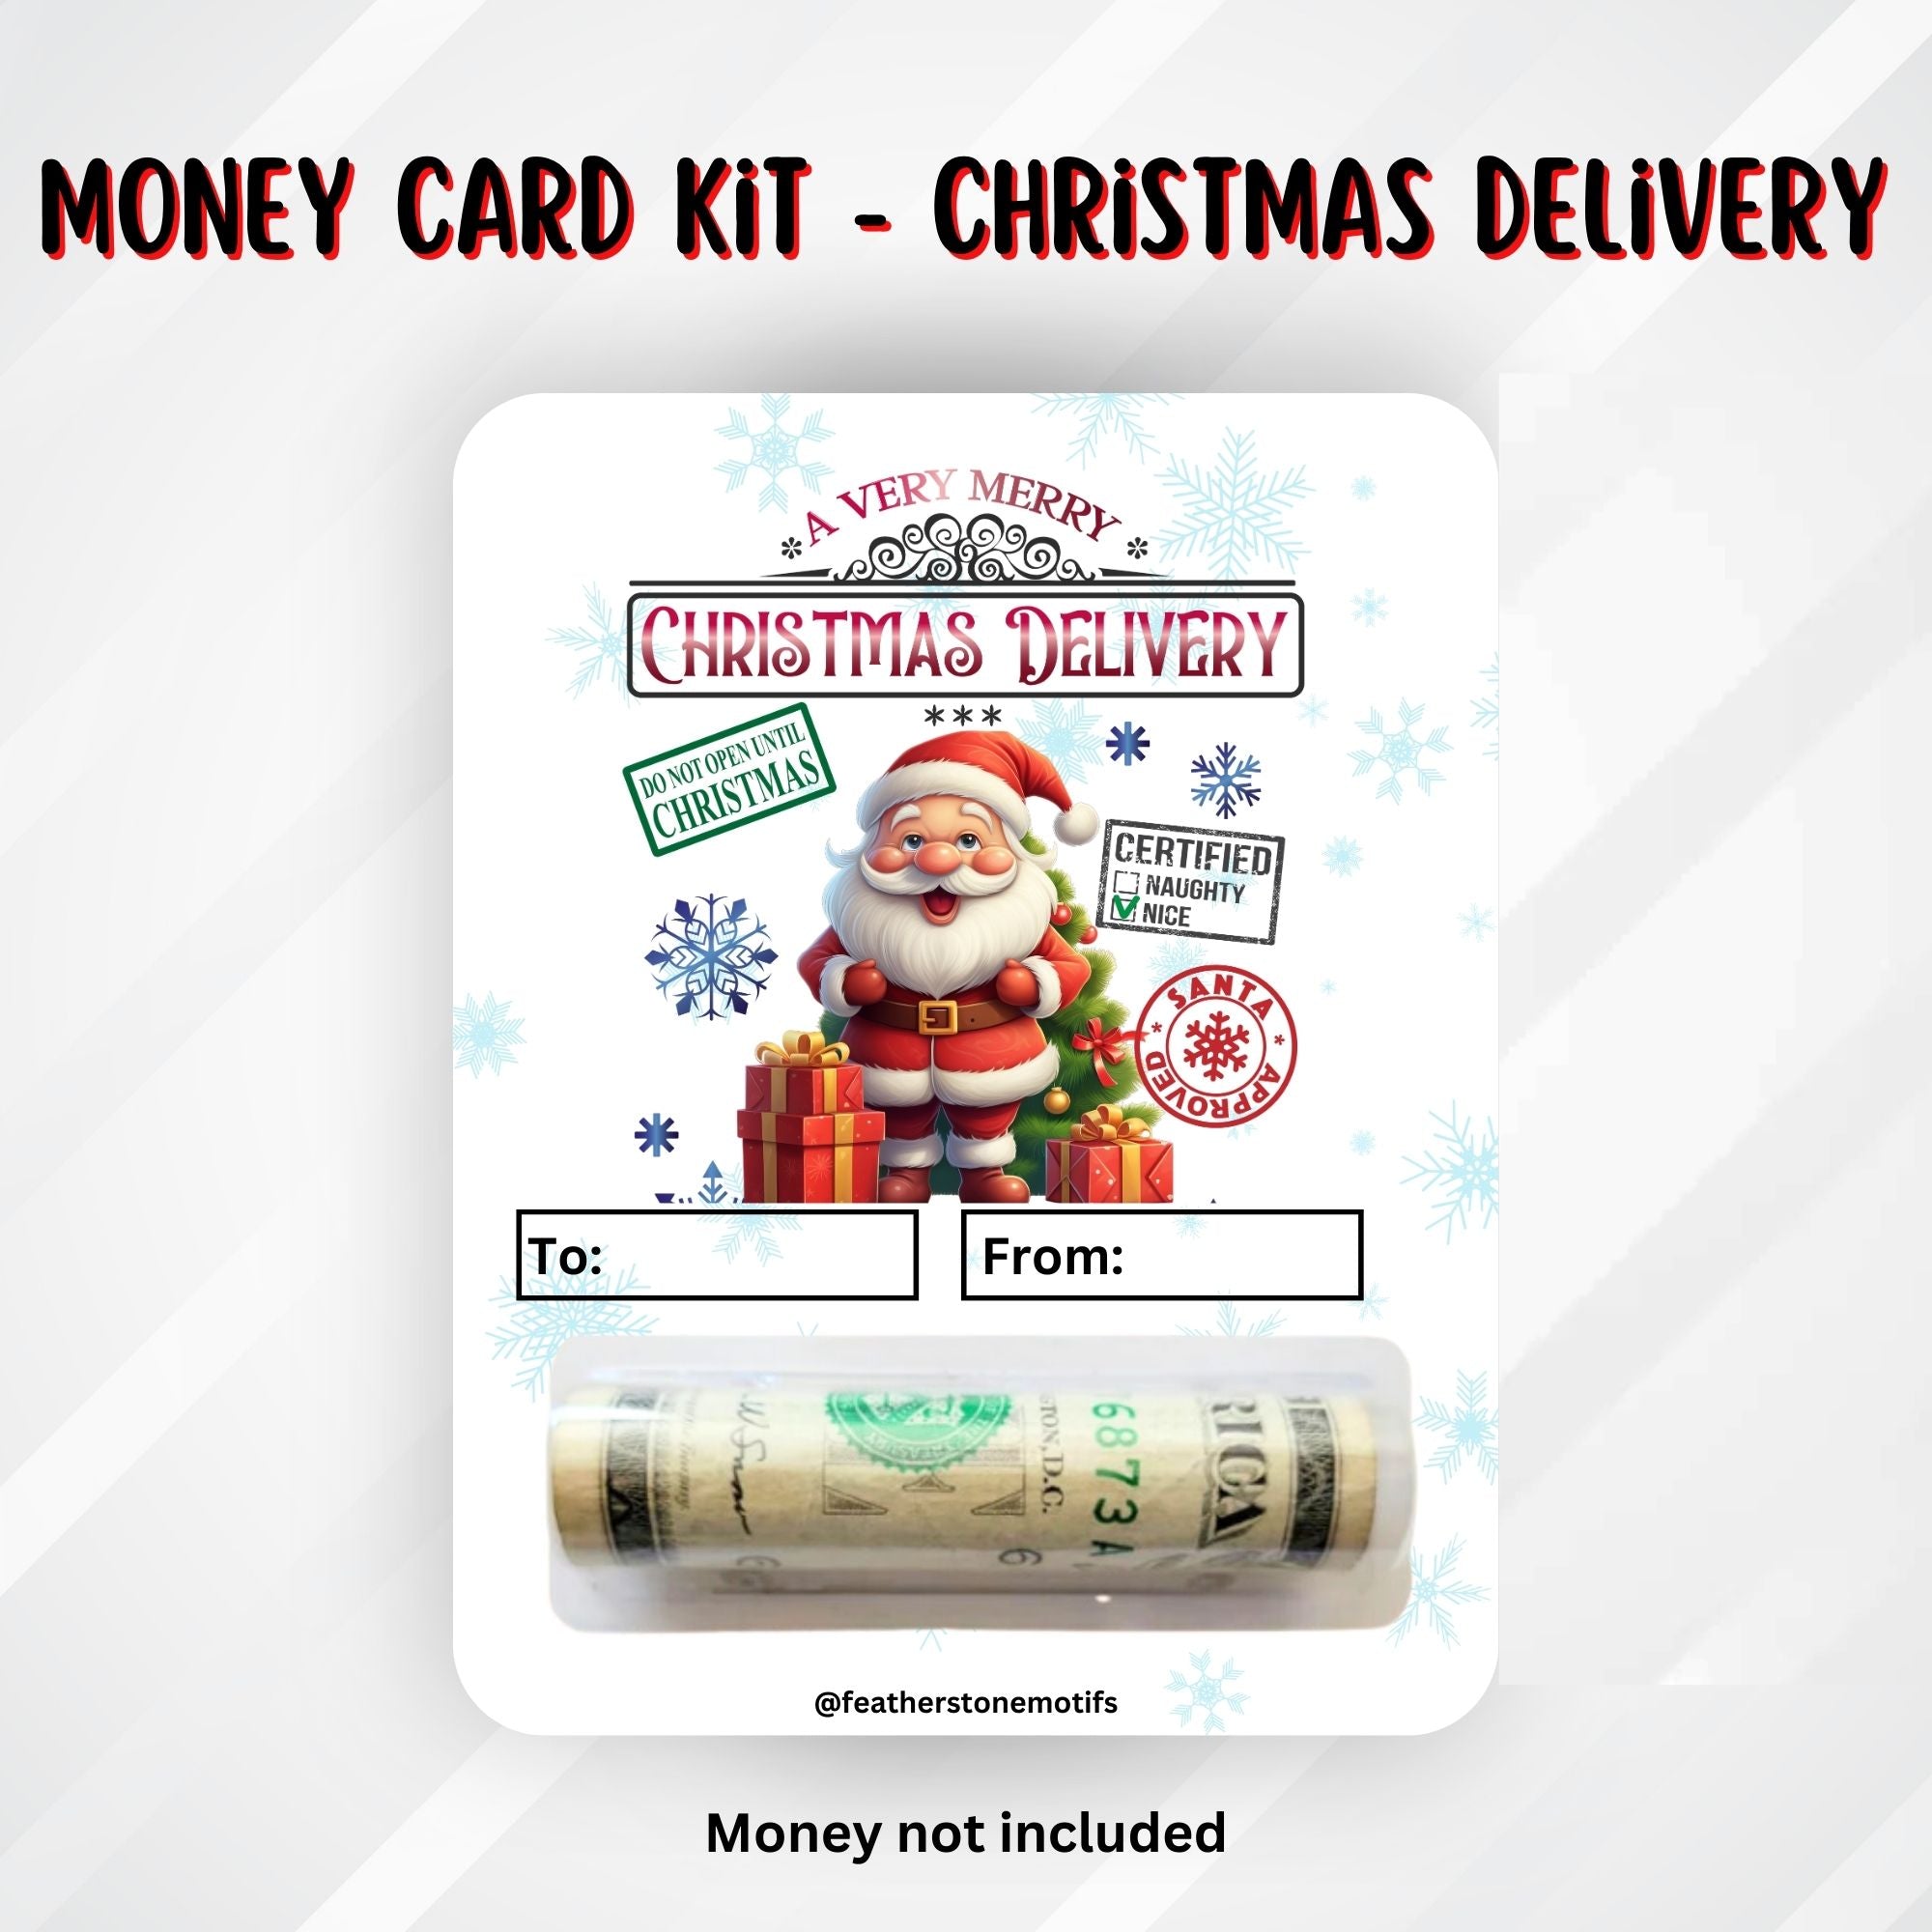 This image shows the money tube attached to the Christmas Delivery Money Card.